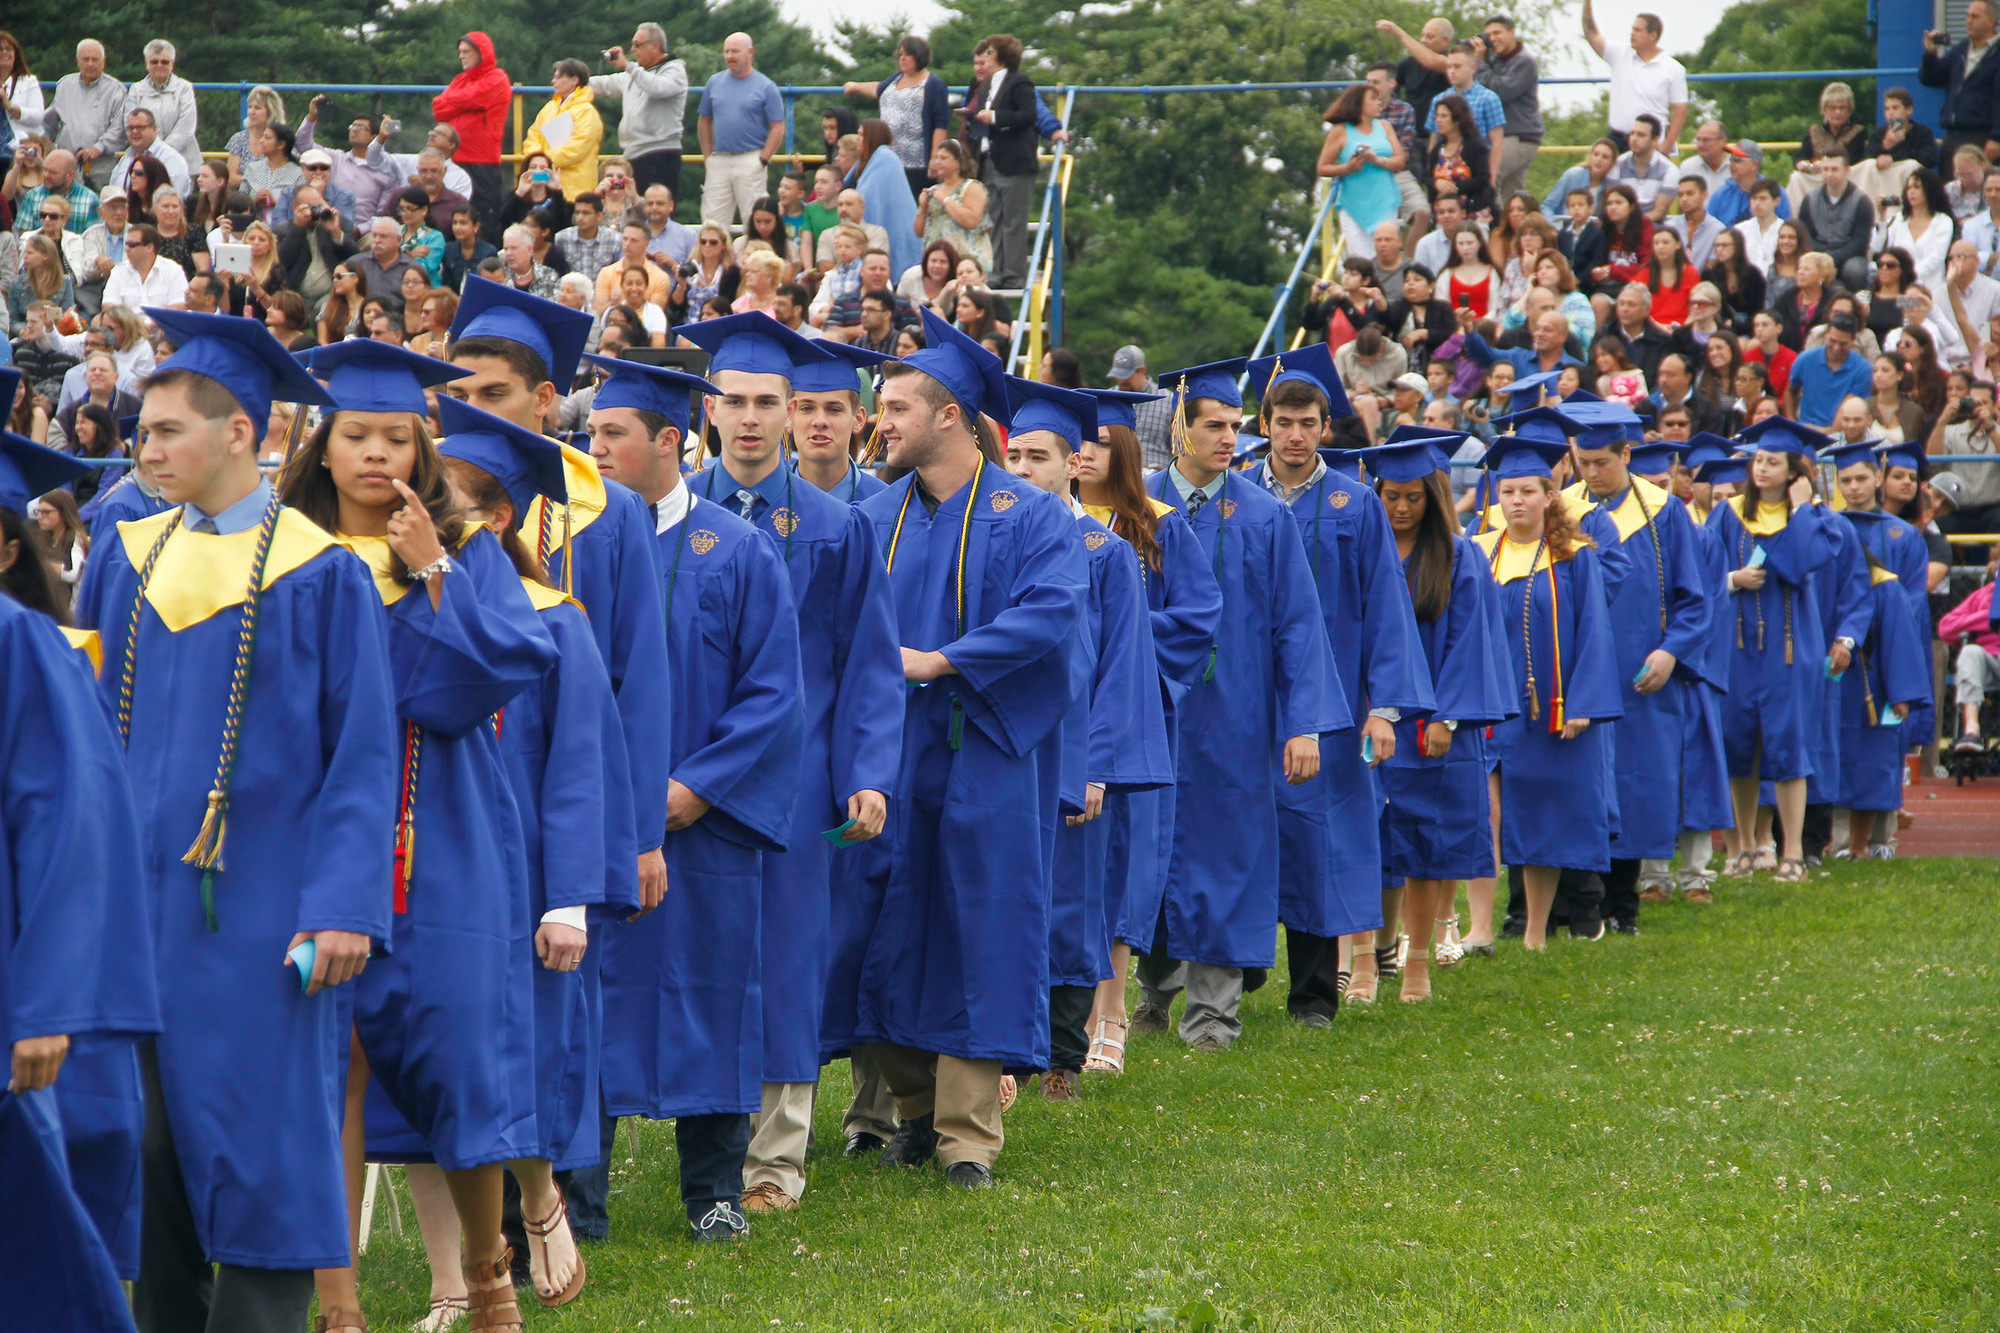 The seniors walked from the school to their graduation ceremony, surrounded by hundreds of supporters.